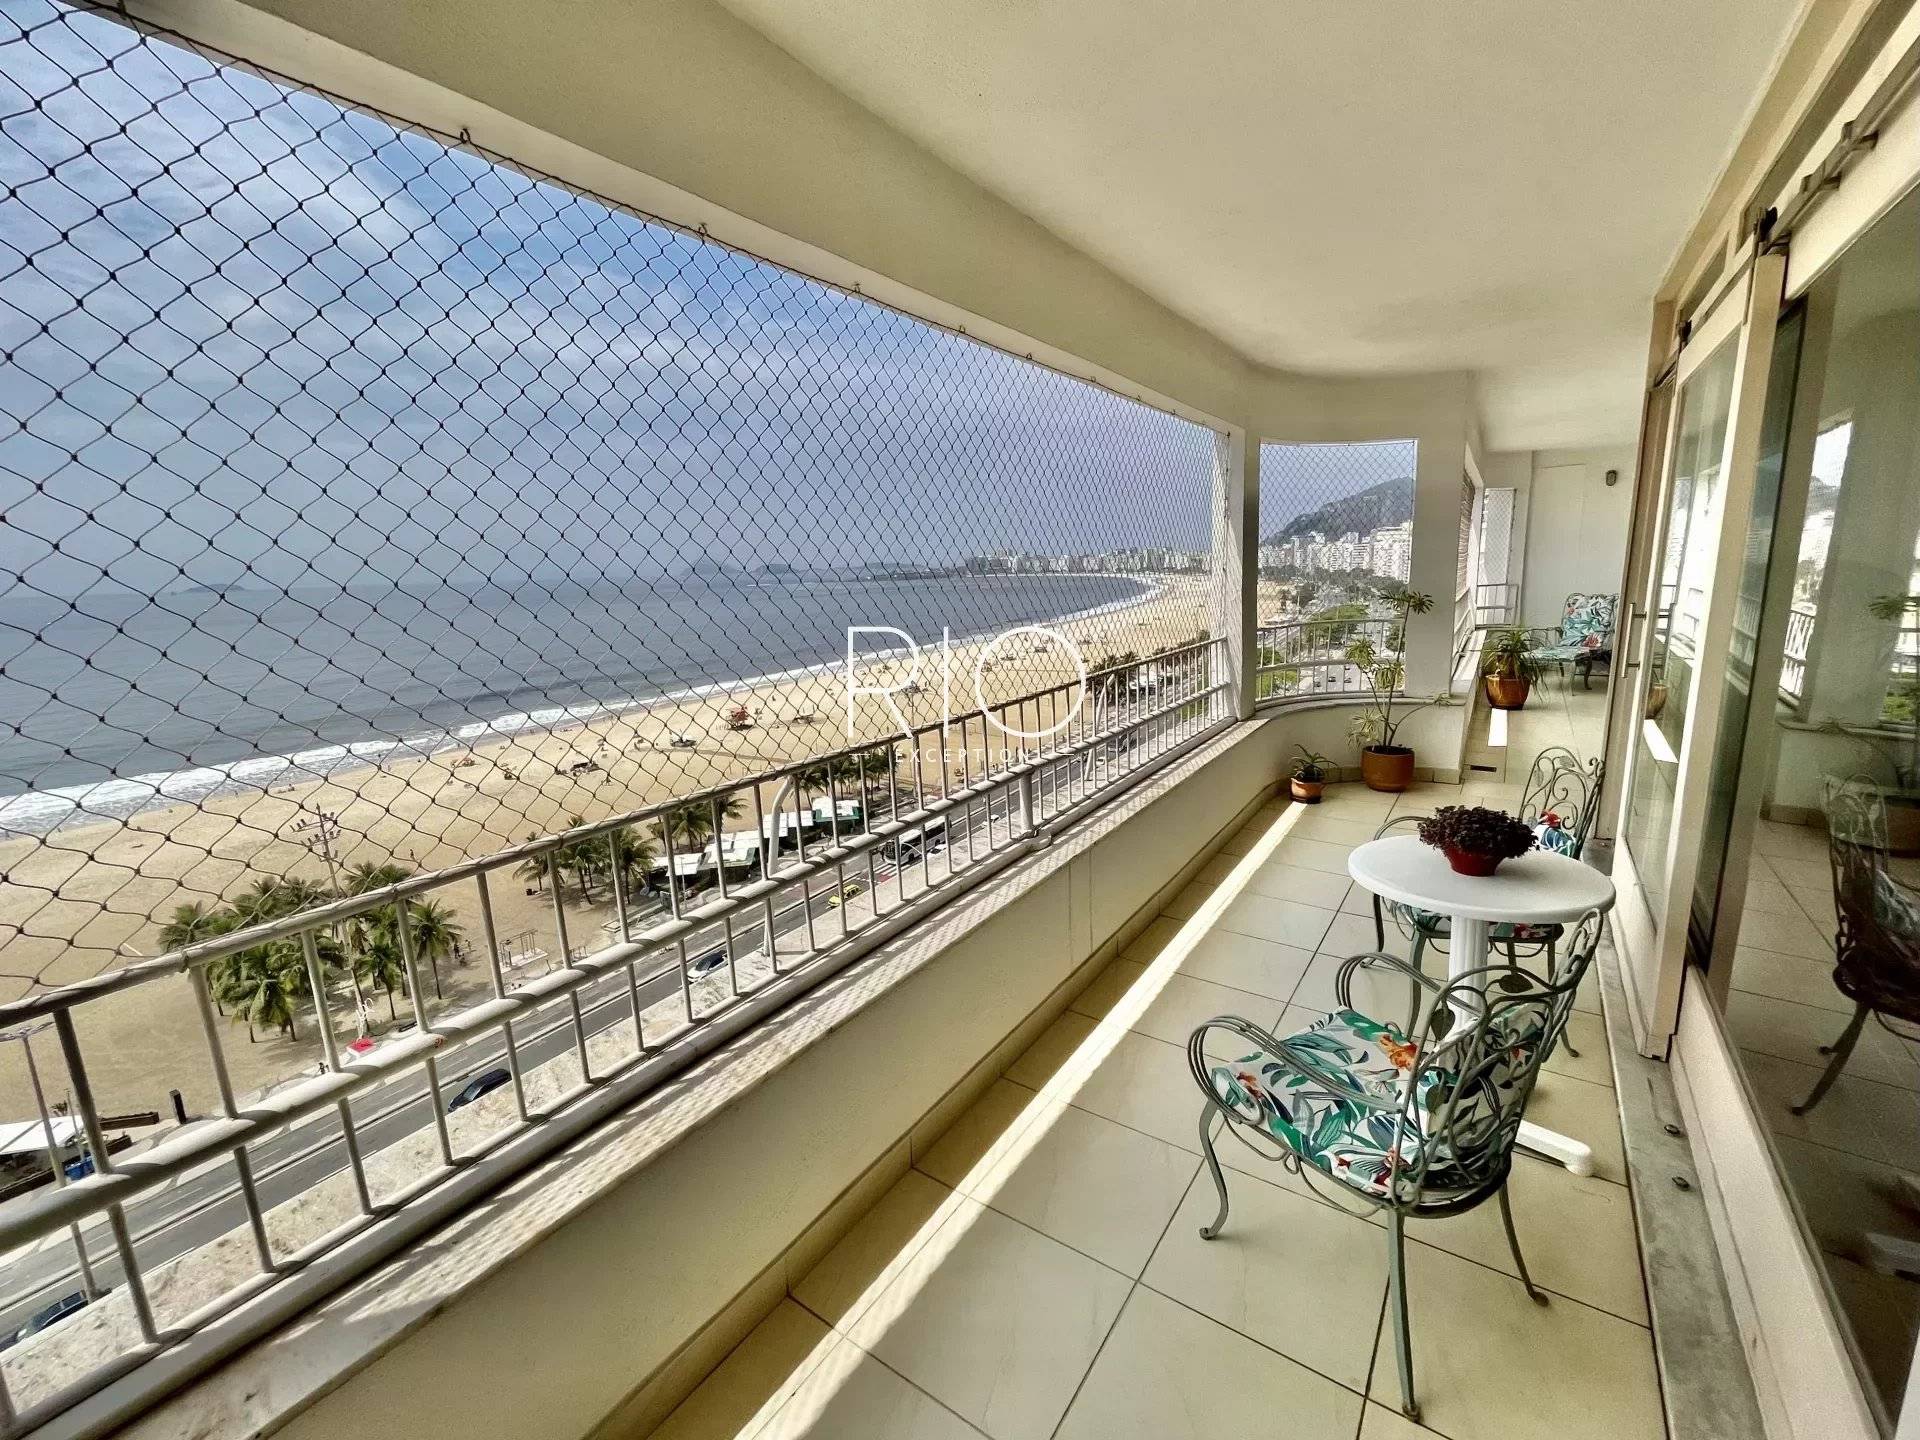 Av. Atlântica, next to the Copacabana Palace, magnificent traditional Carioca apartment on the top floor with balcony !